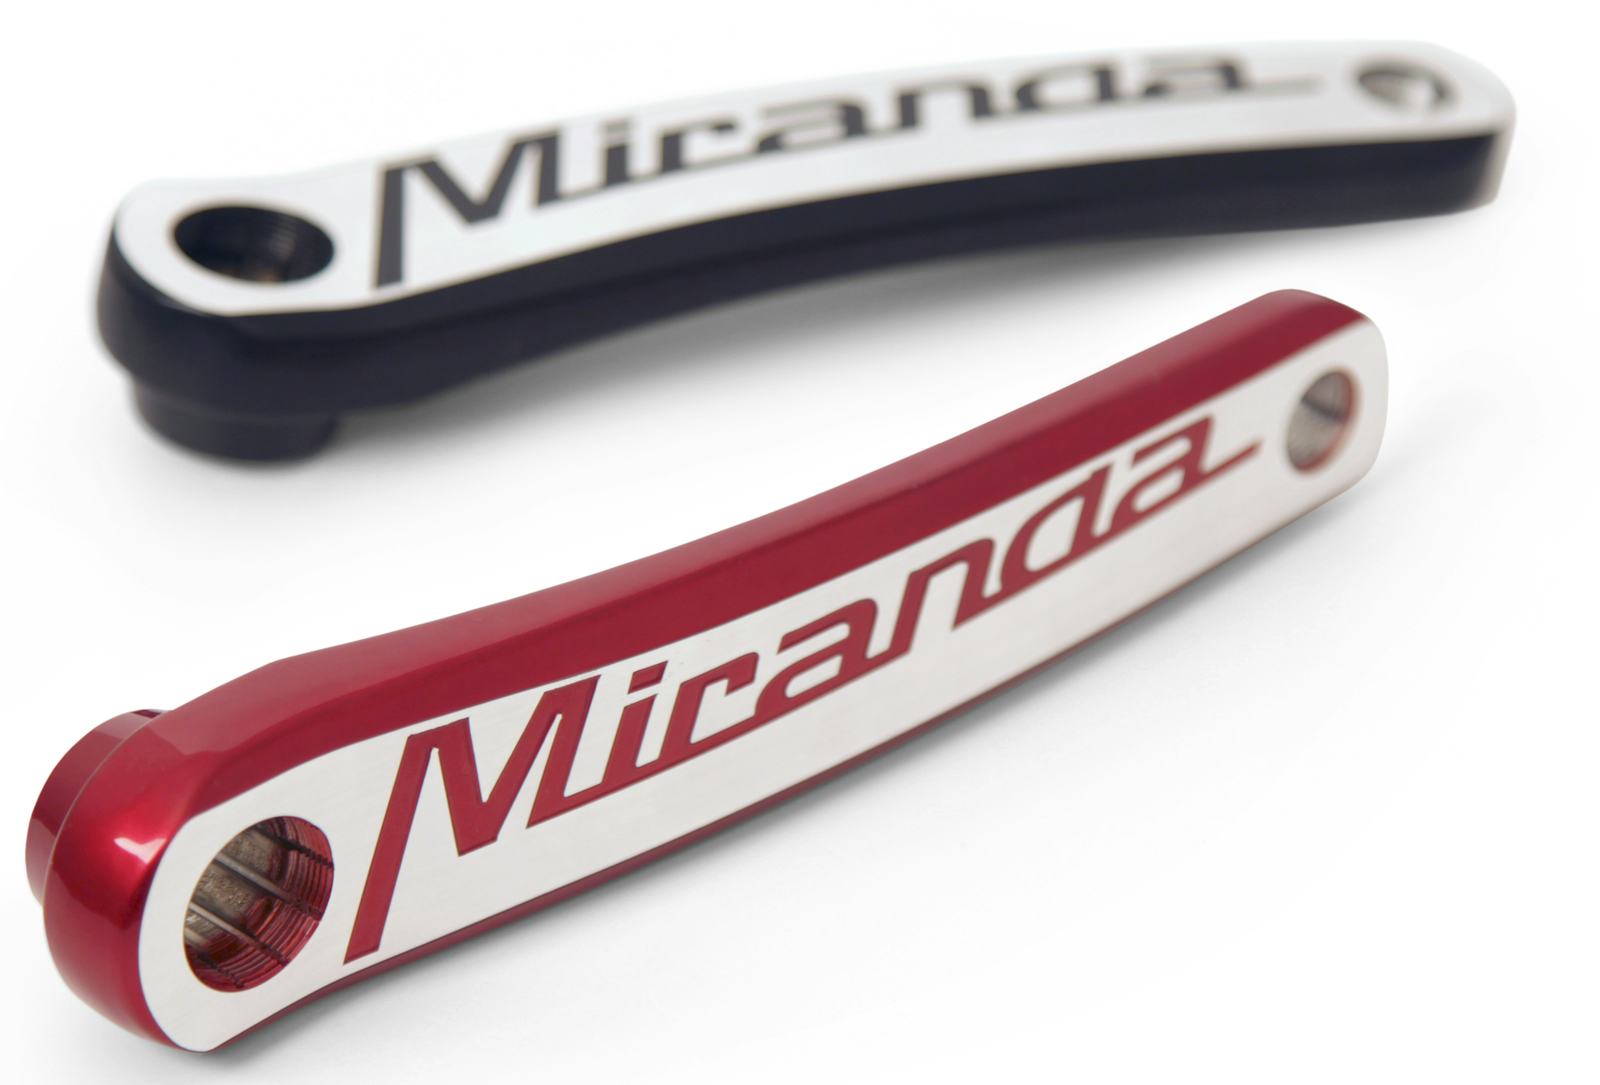 To give the crank a more sportive look, Miranda makes them available with a engraved logo. - Photo Miranda